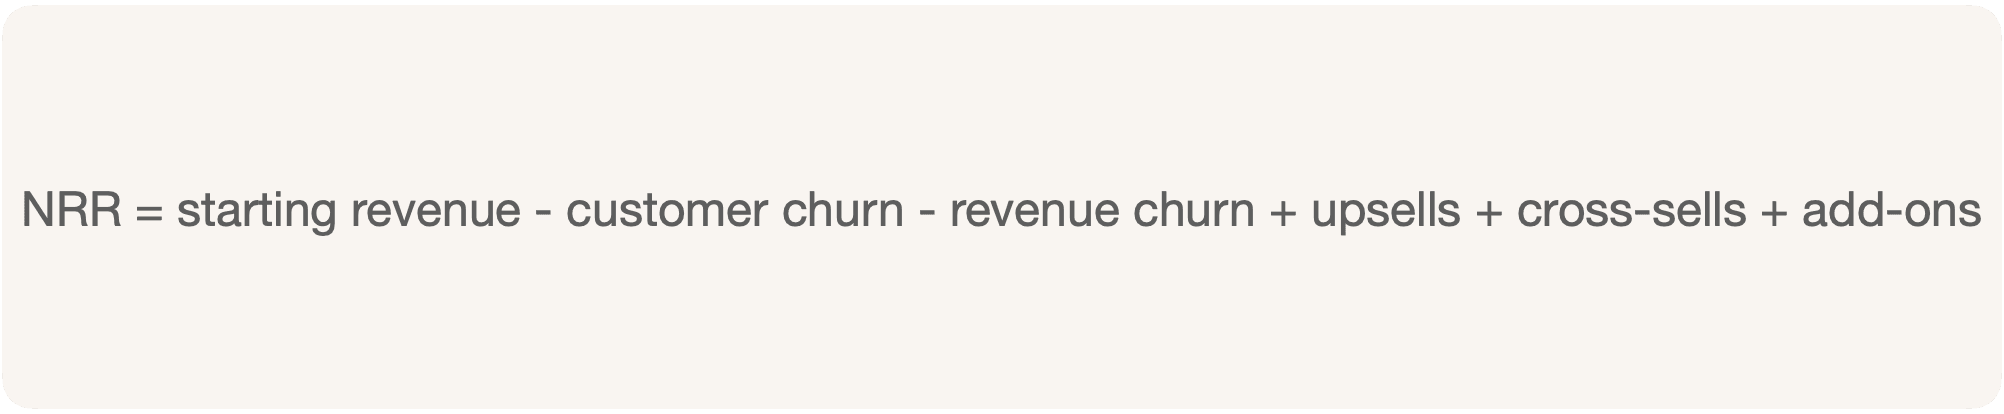 NRR expressed as a dollar value is the starting revenue minus all the churn plus the expansion revenue for a given period